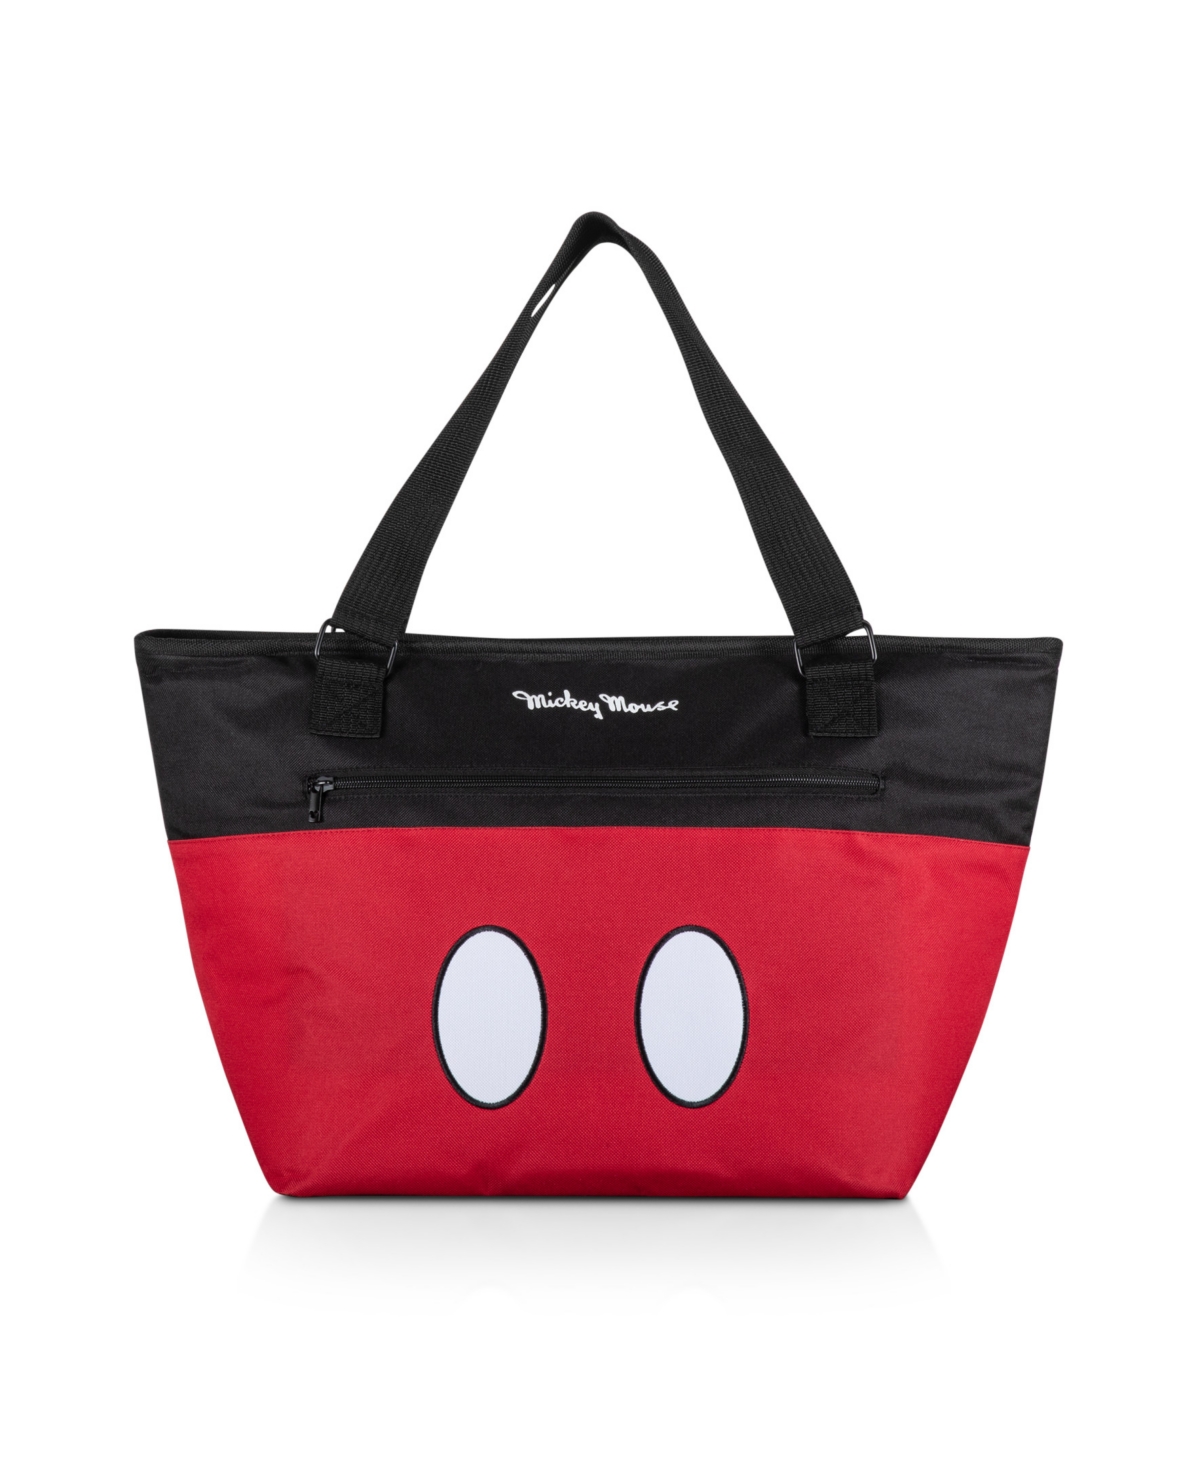 Mickey Shorts Topanga Cooler Bag - Black with Red Pattern